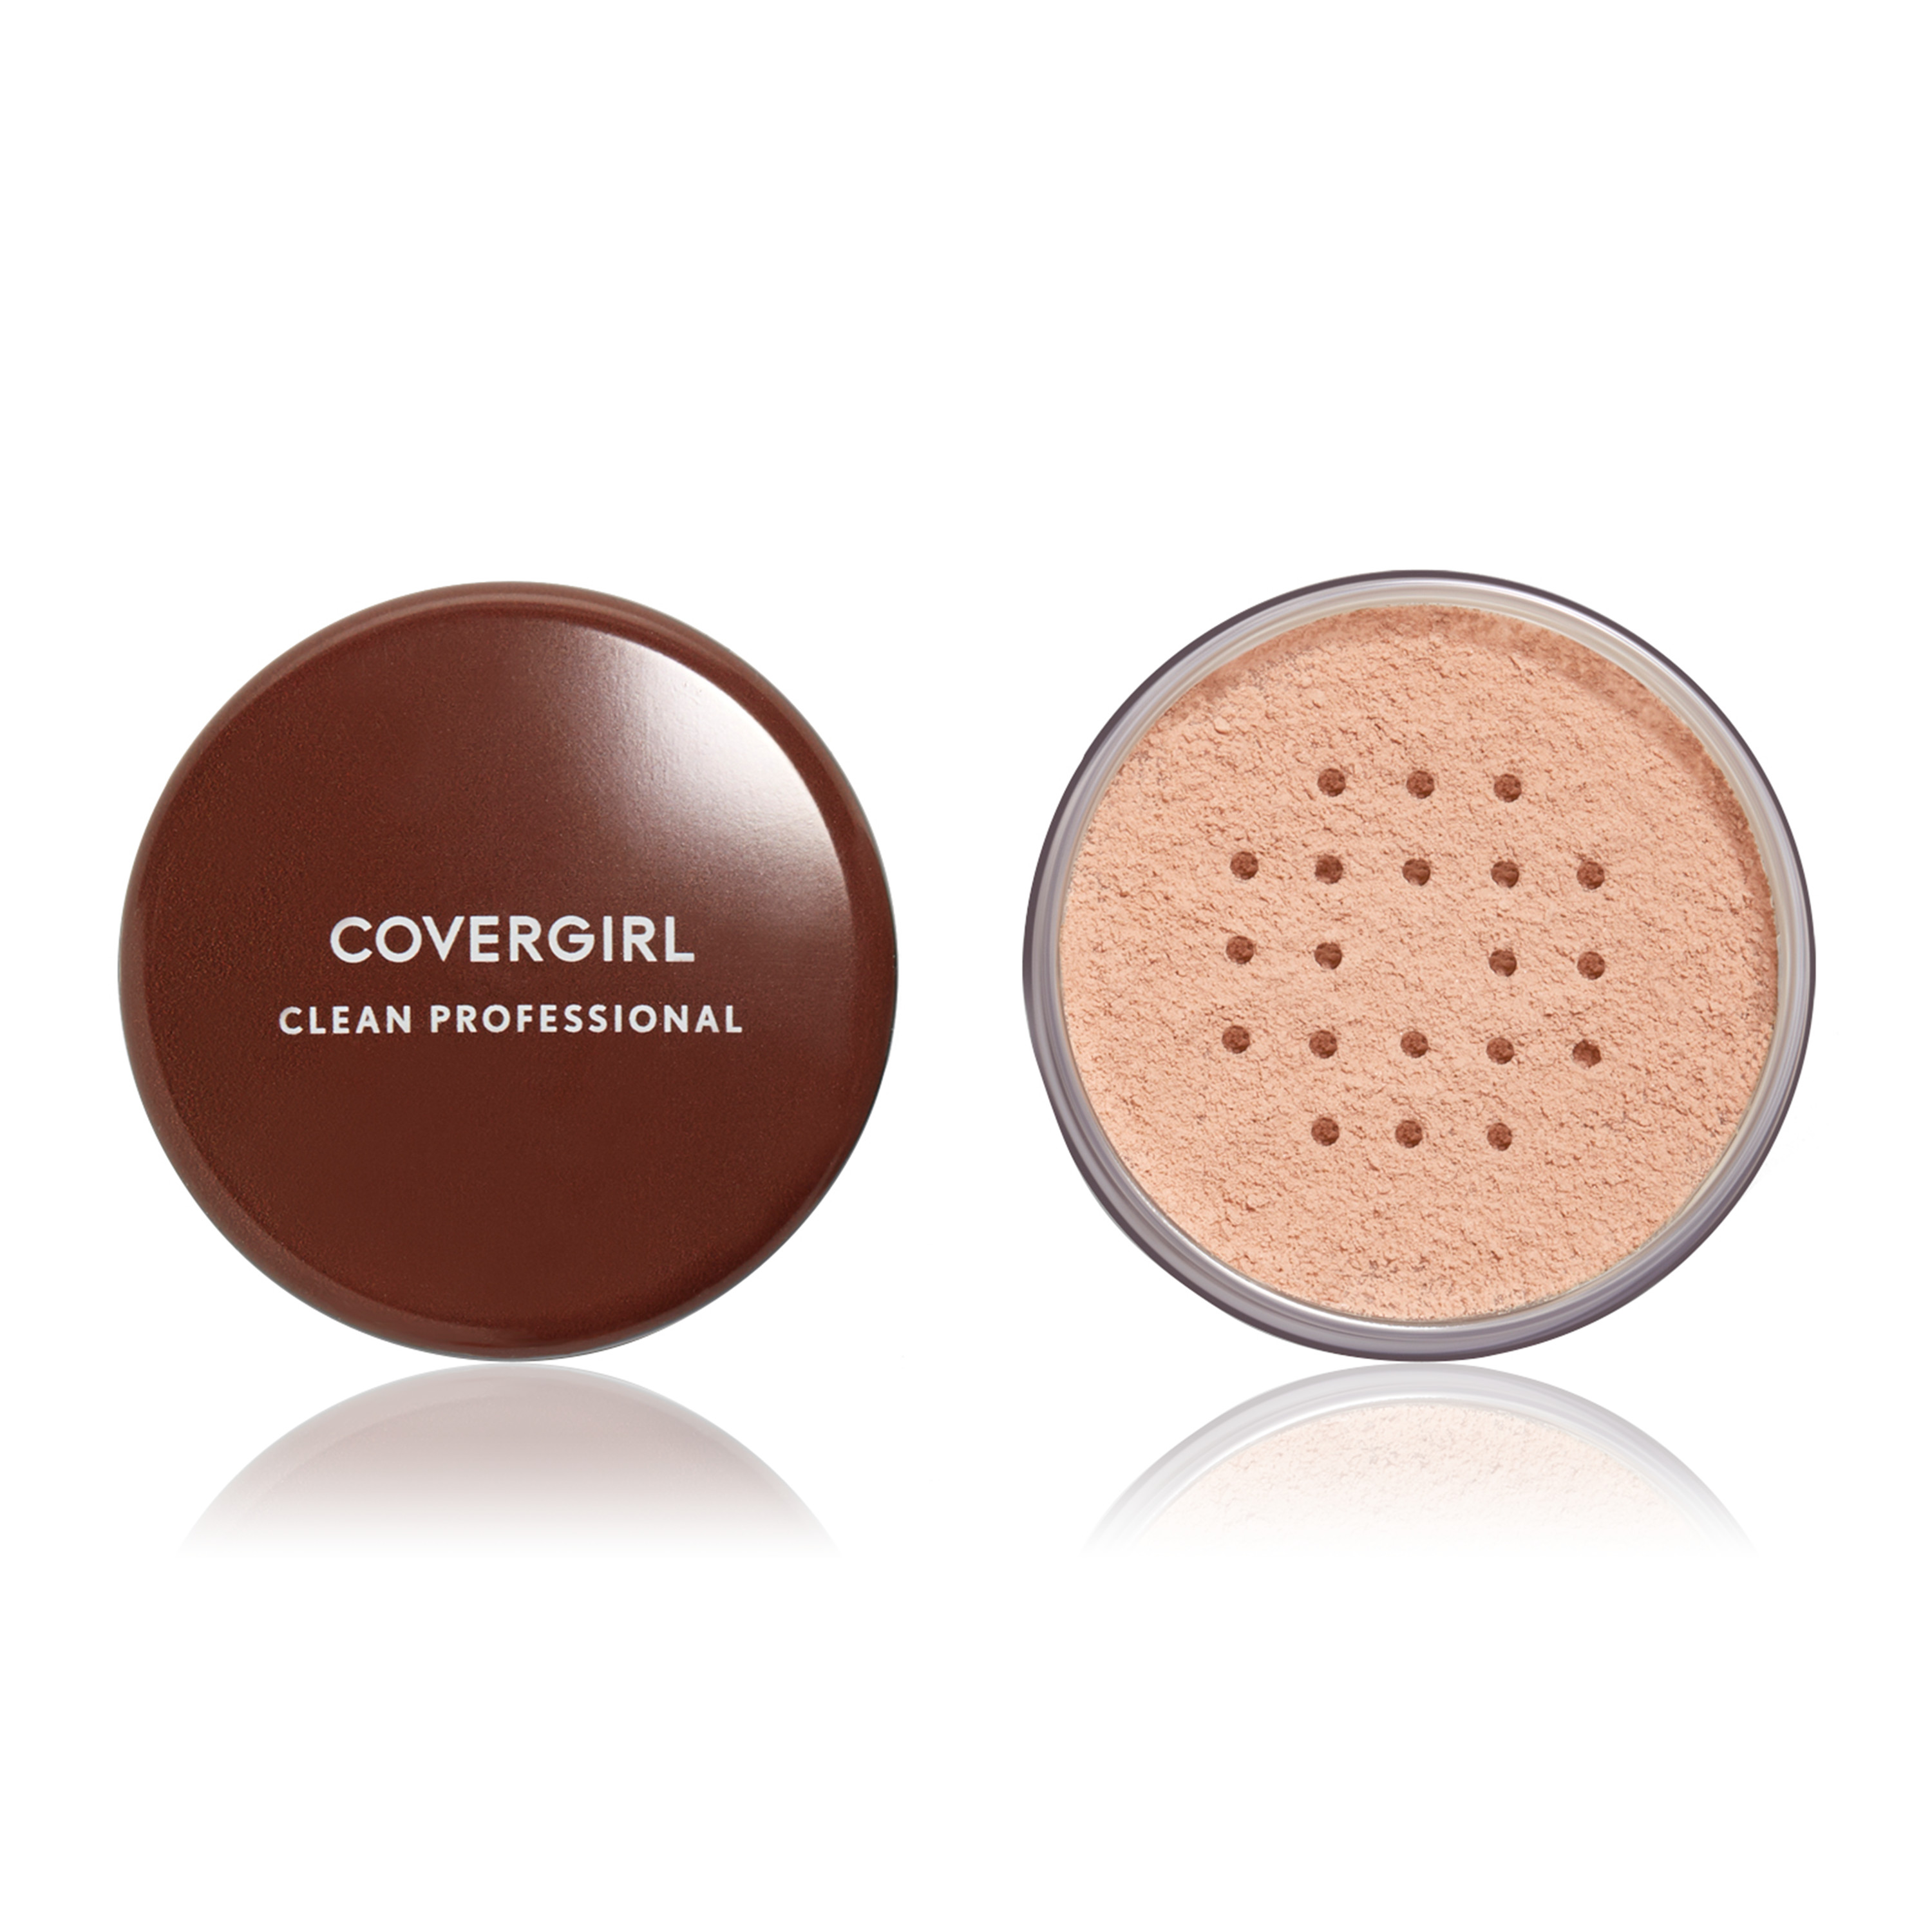 COVERGIRL Clean Professional Loose Powder, 110 Translucent Light, 0.70 oz - image 1 of 3